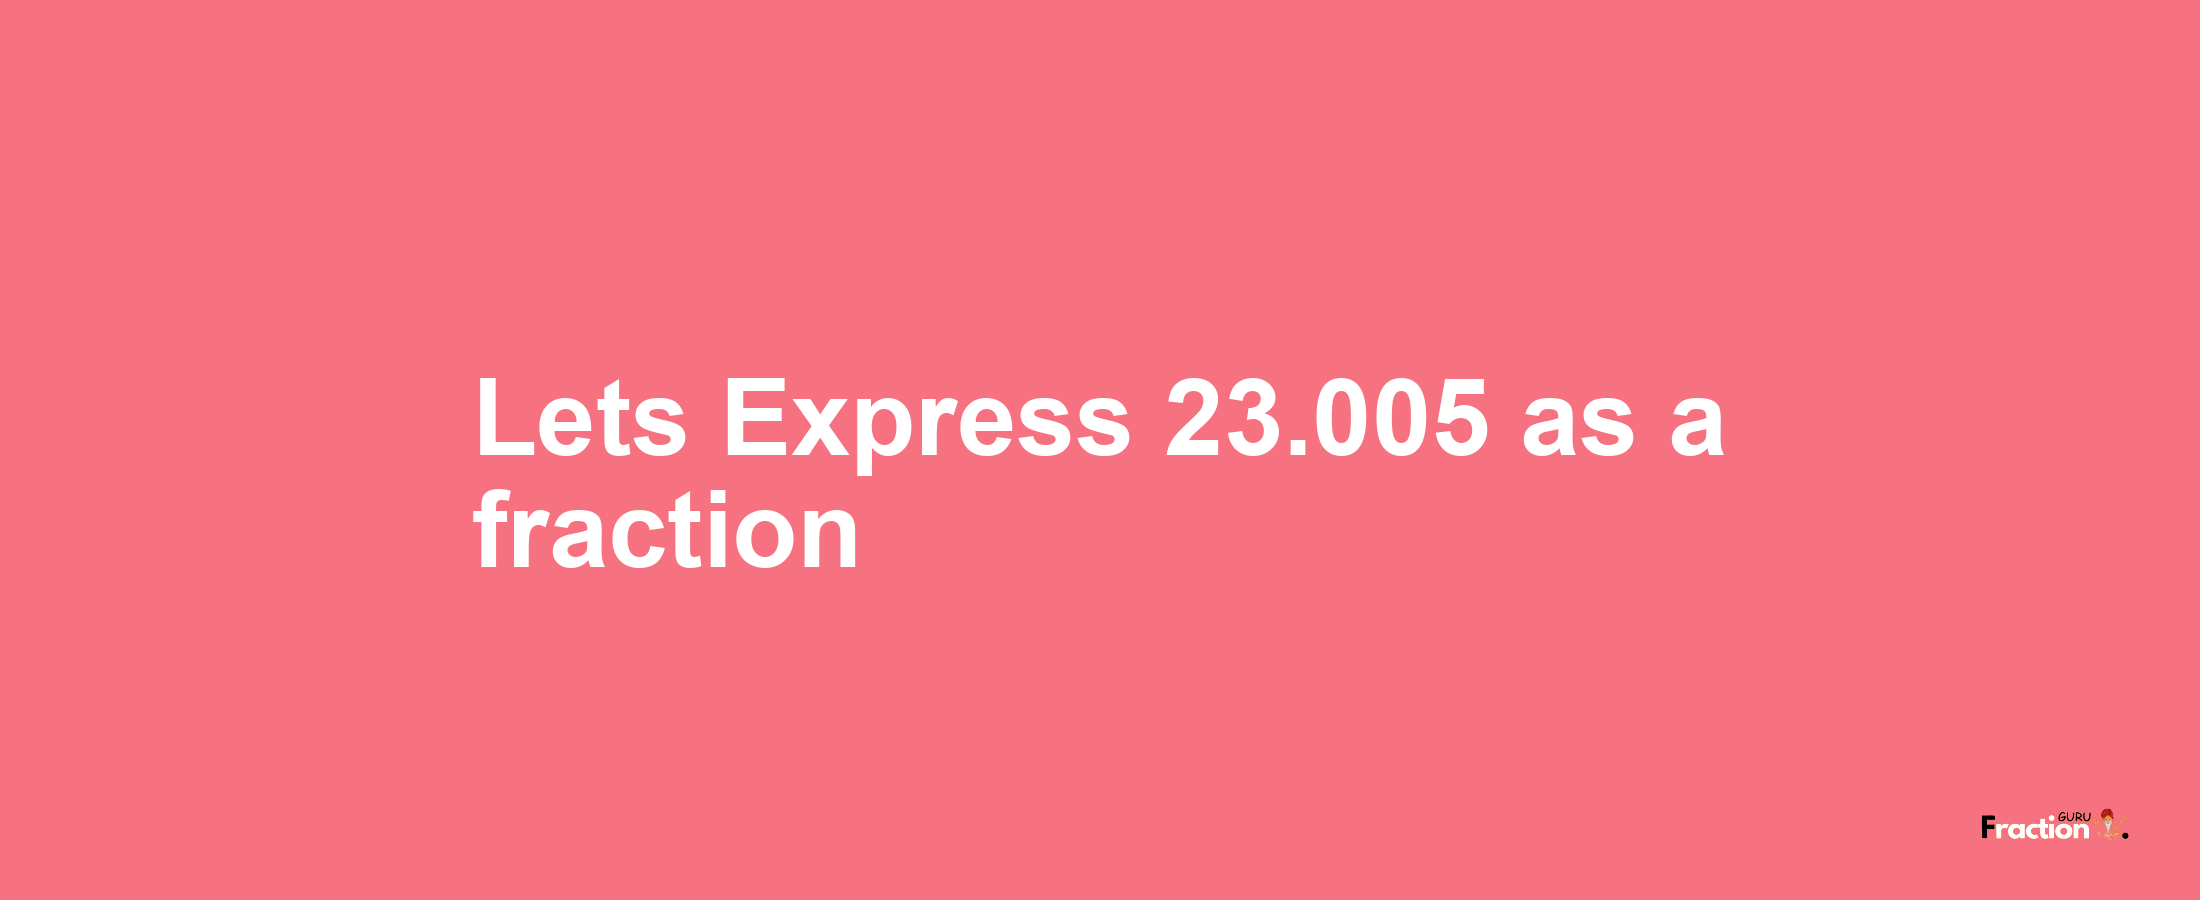 Lets Express 23.005 as afraction